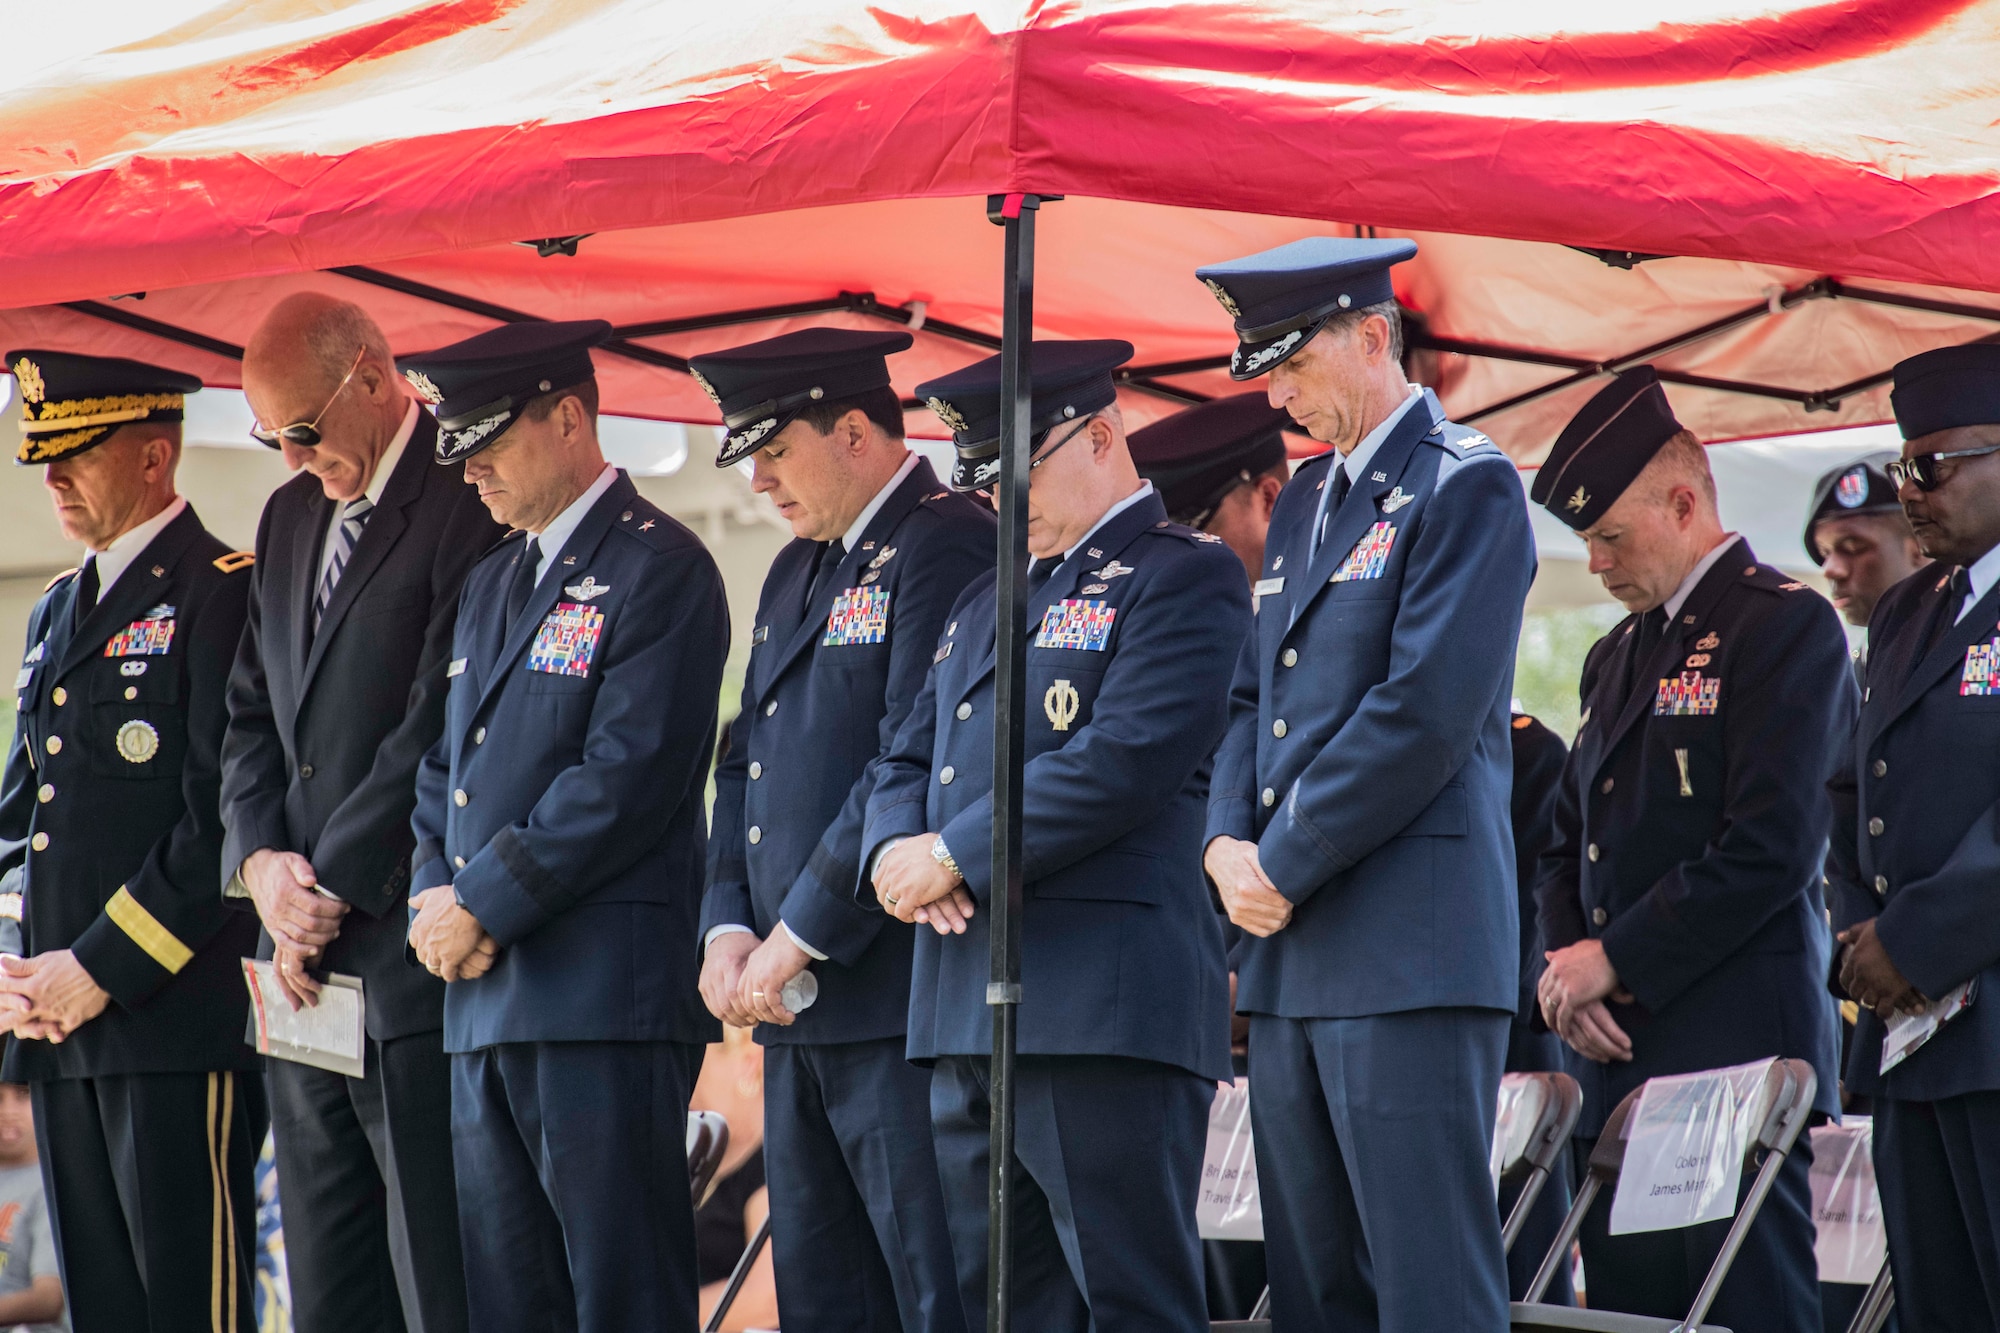 Military leaders and attendees bow their heads during a memorial ceremony May 2, 2019, in Port Wentworth, GA. The event paid homage to the lives of the nine Puerto Rican Air National Guard Airmen who lost their lives when their C-130 Hercules, assigned to the 156th Airlift Wing, crashed May 2, 2018.